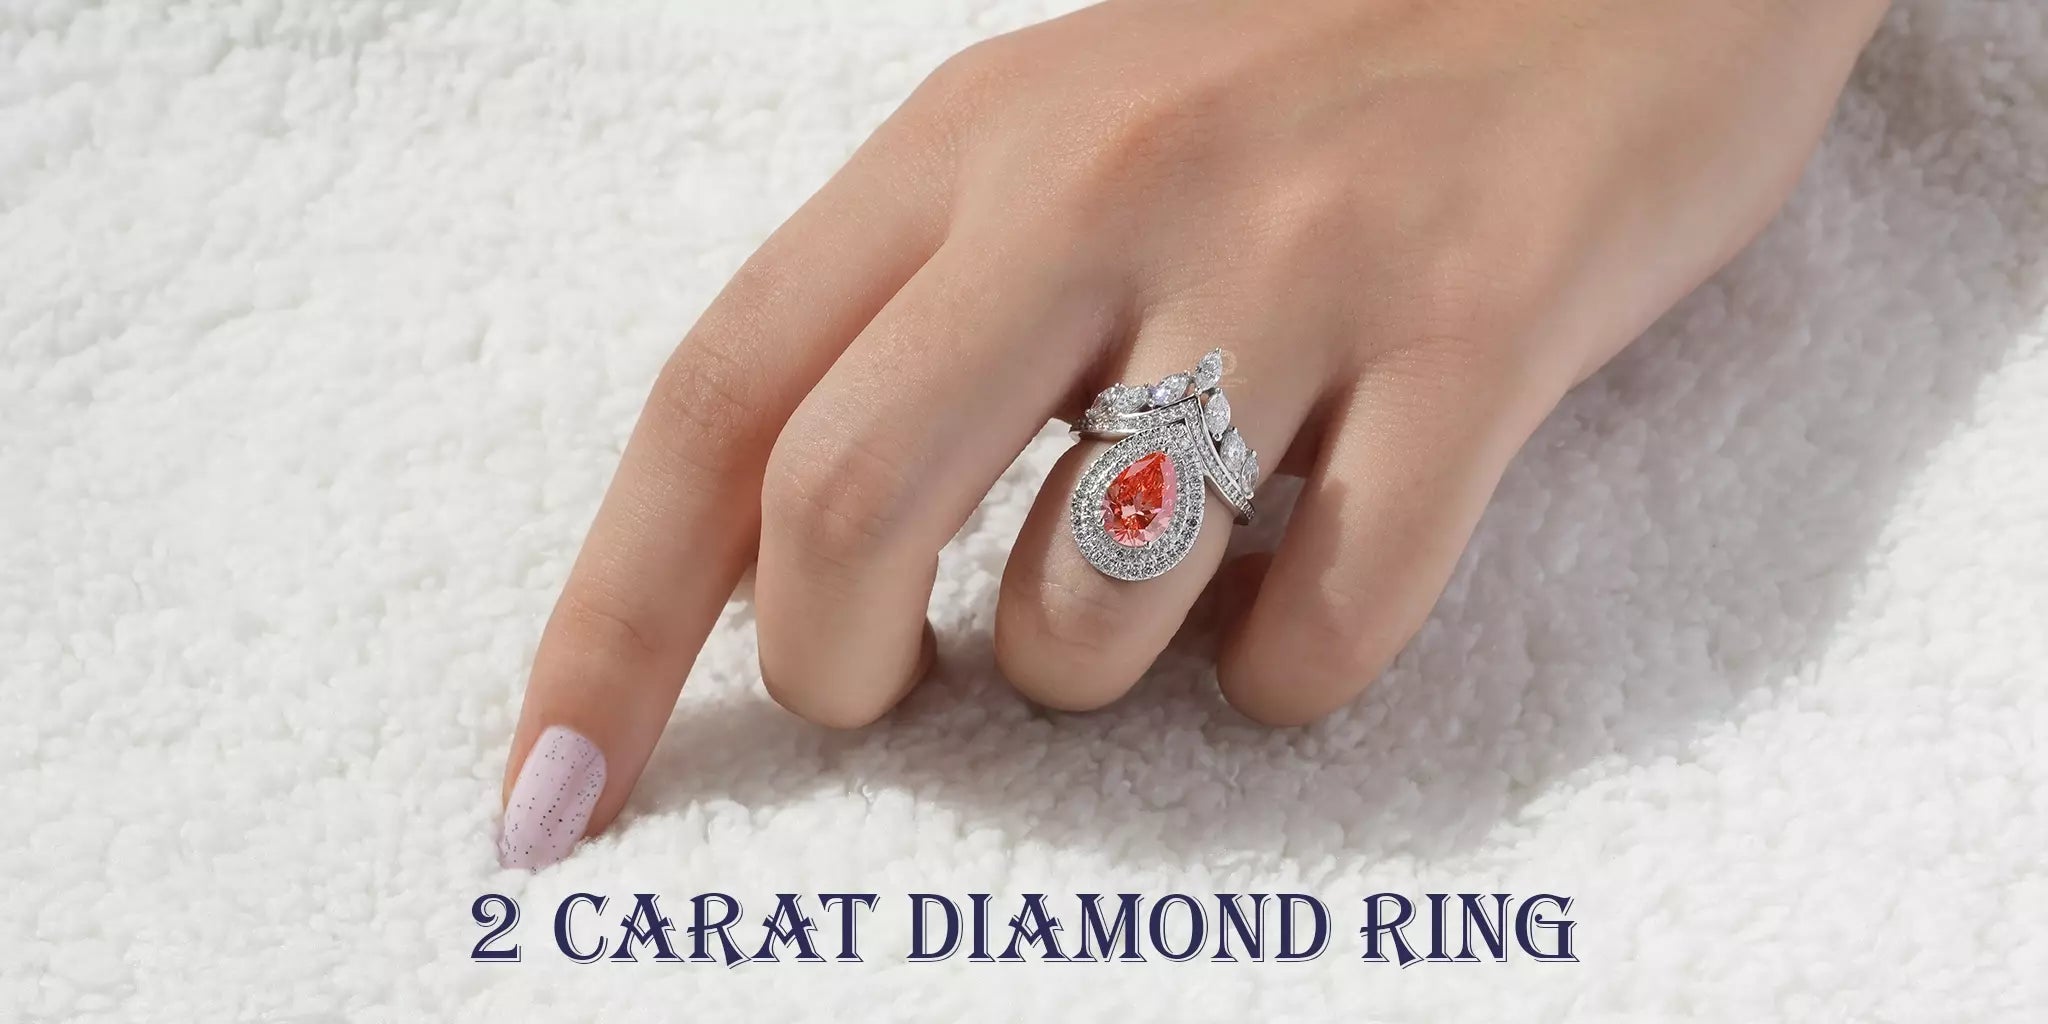 2 Carat Diamond Rings The Modern Buying Guide - Ouros Jewels